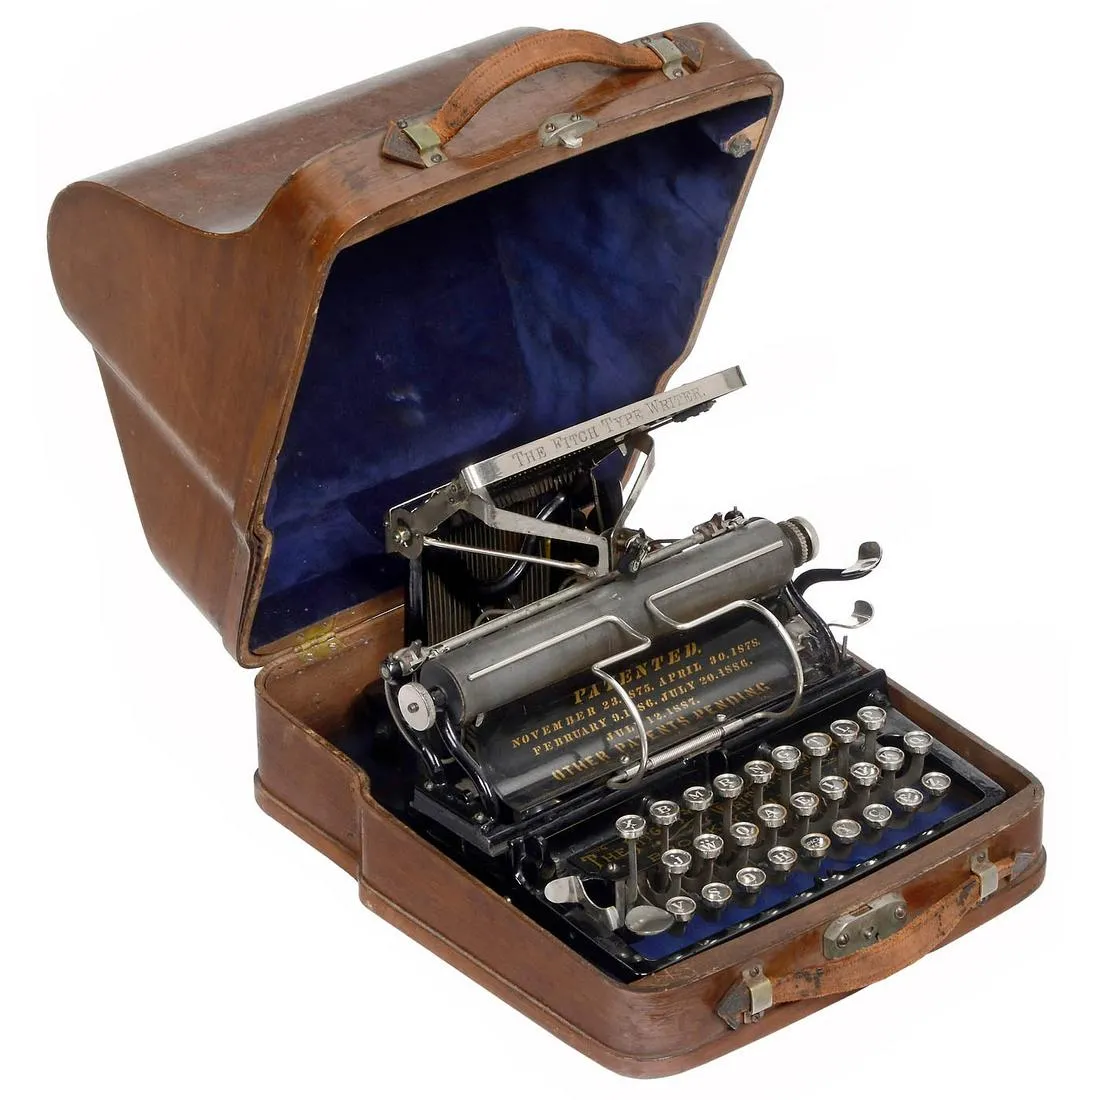 Circa-1891 Fitch Type Writer, $32,029. Image courtesy of Auction Team Breker and LiveAuctioneers